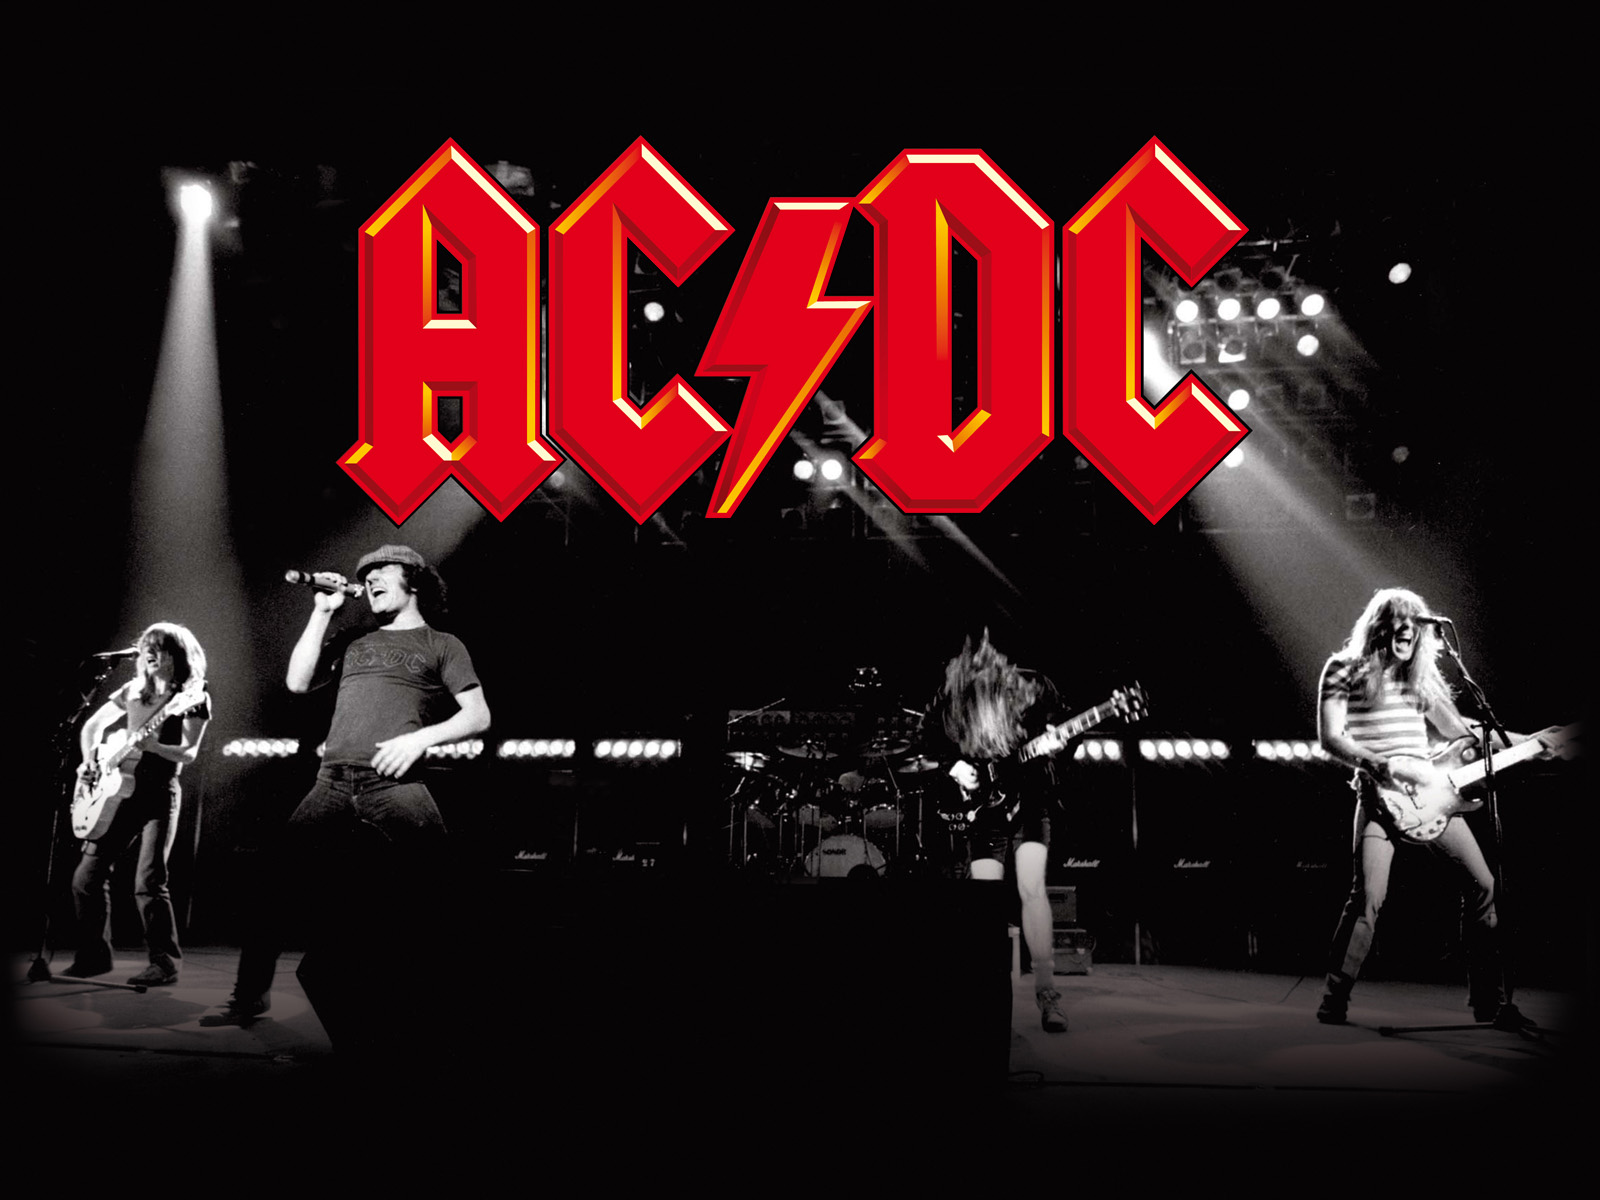 ac dc wallpaper iphone,musical,music,performance,performing arts,talent show